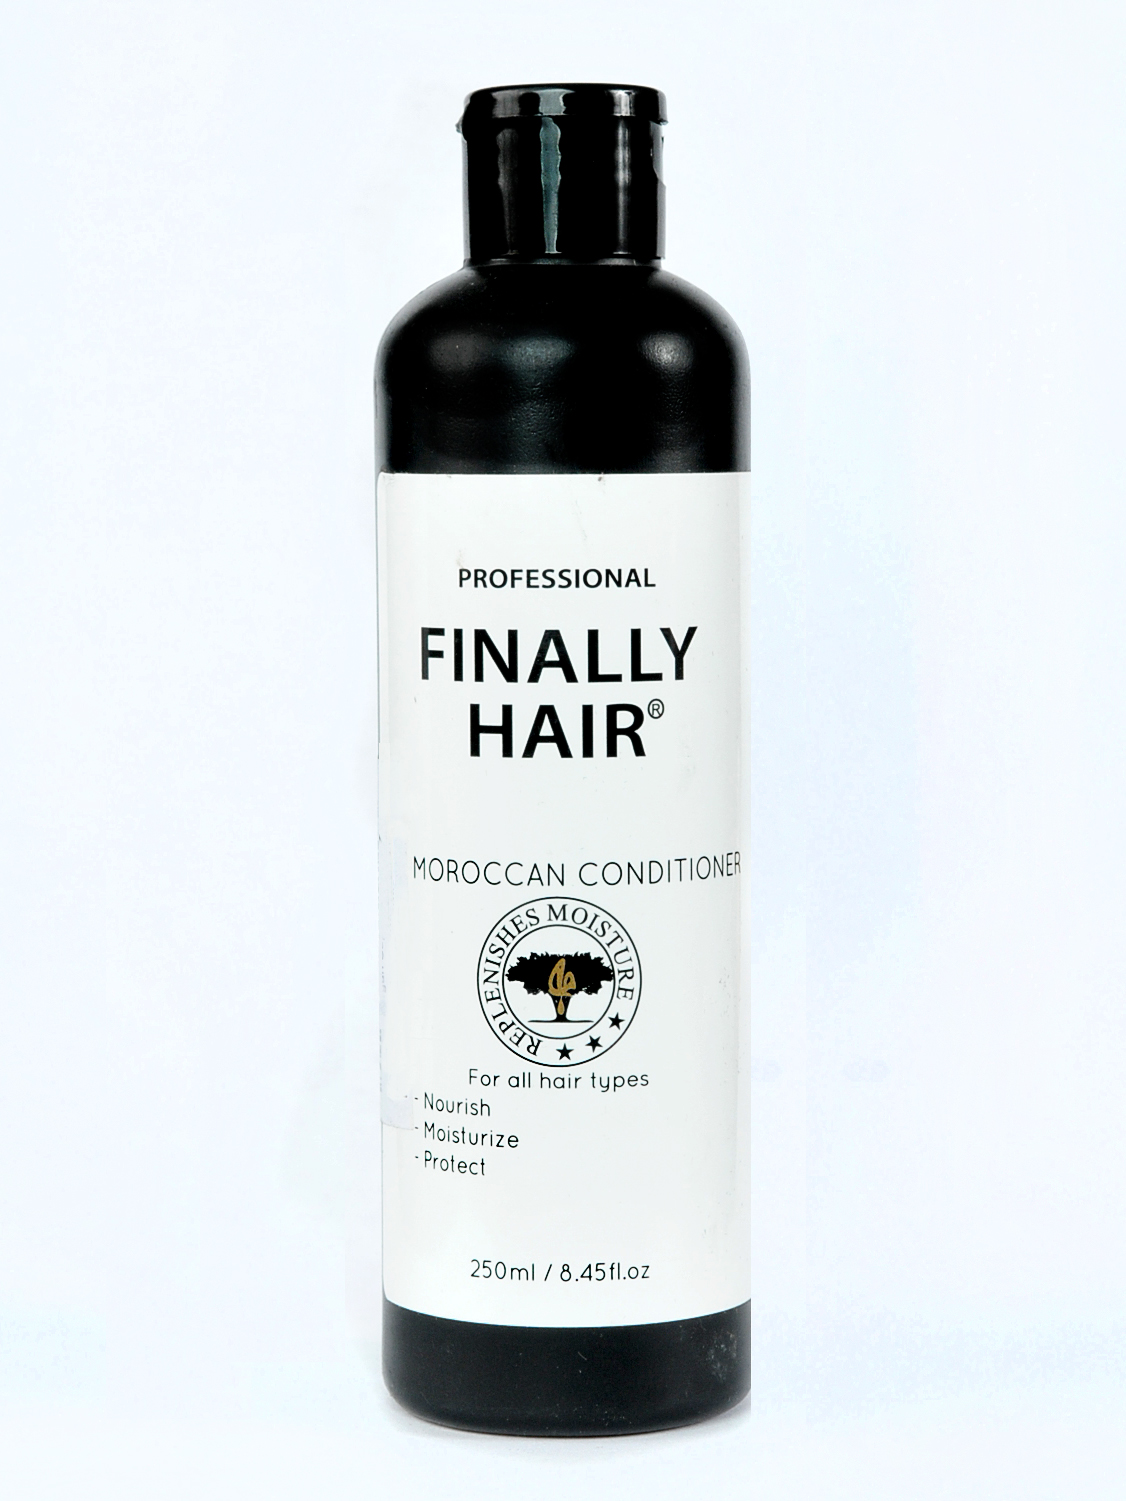 Moroccan Conditioner With Argan Leaves Your Hair Silky & Smooth